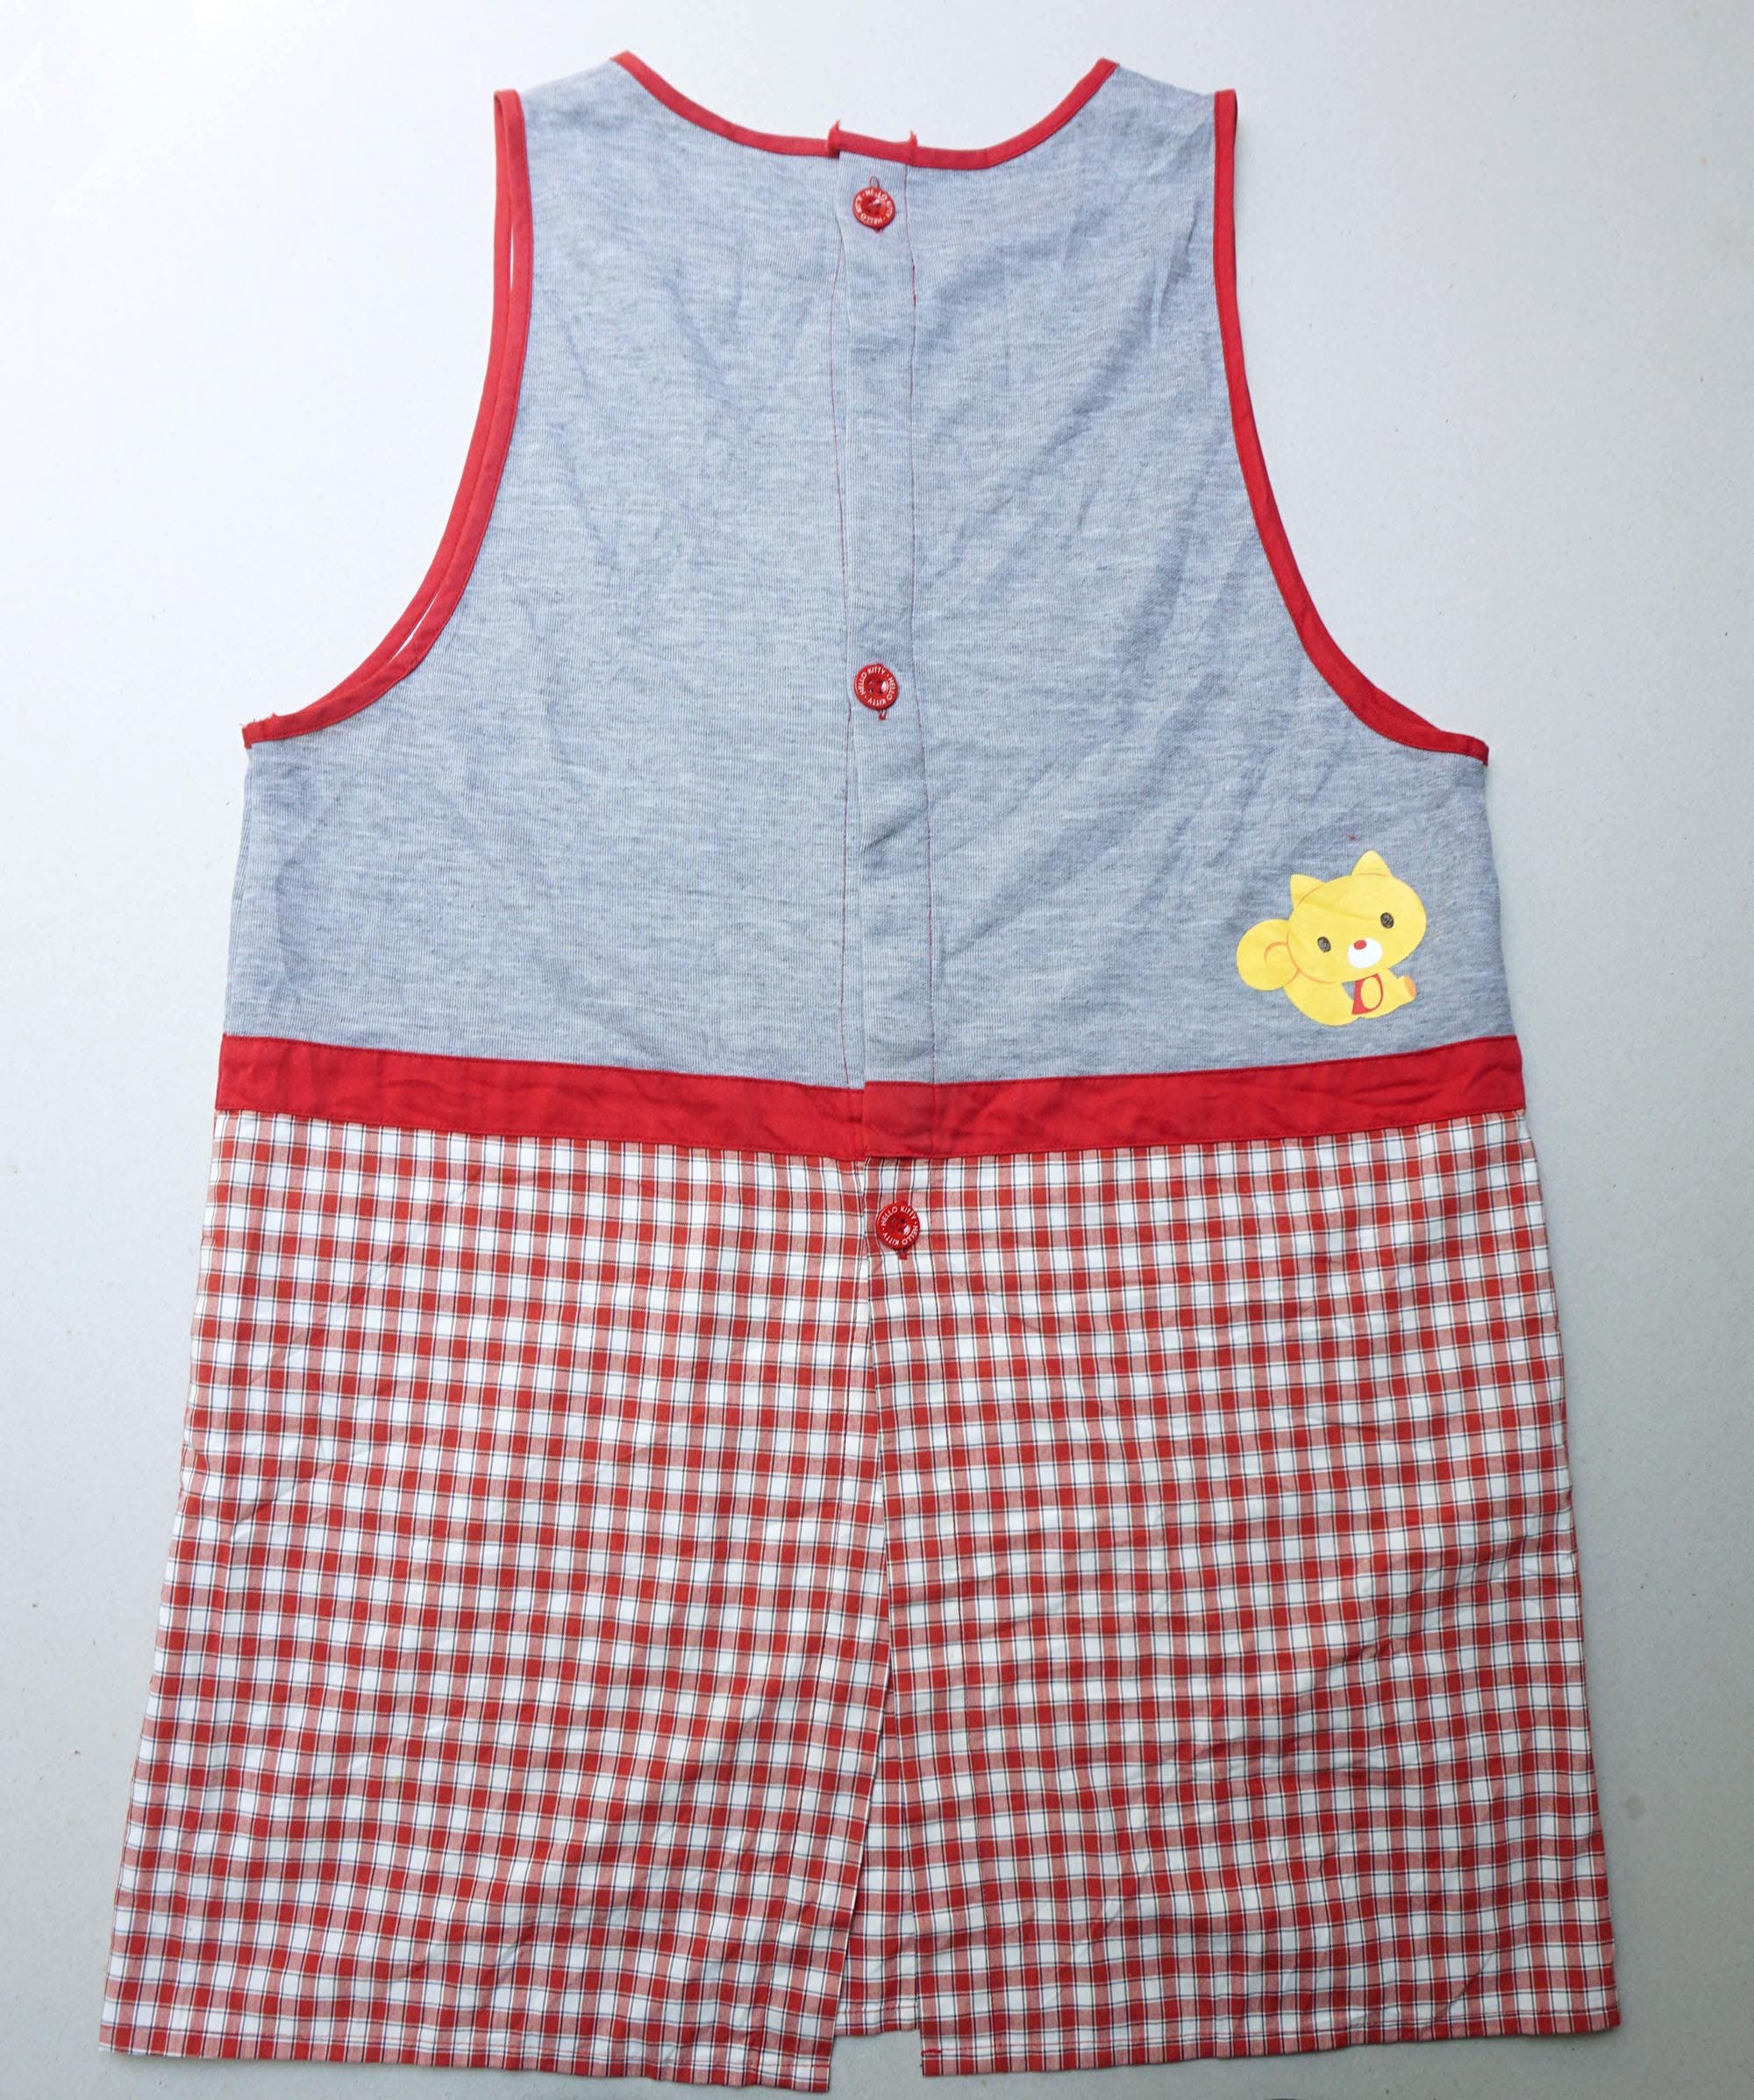 Japanese Brand - HELLO KITTY Patchwork & Checkered Apron - 4